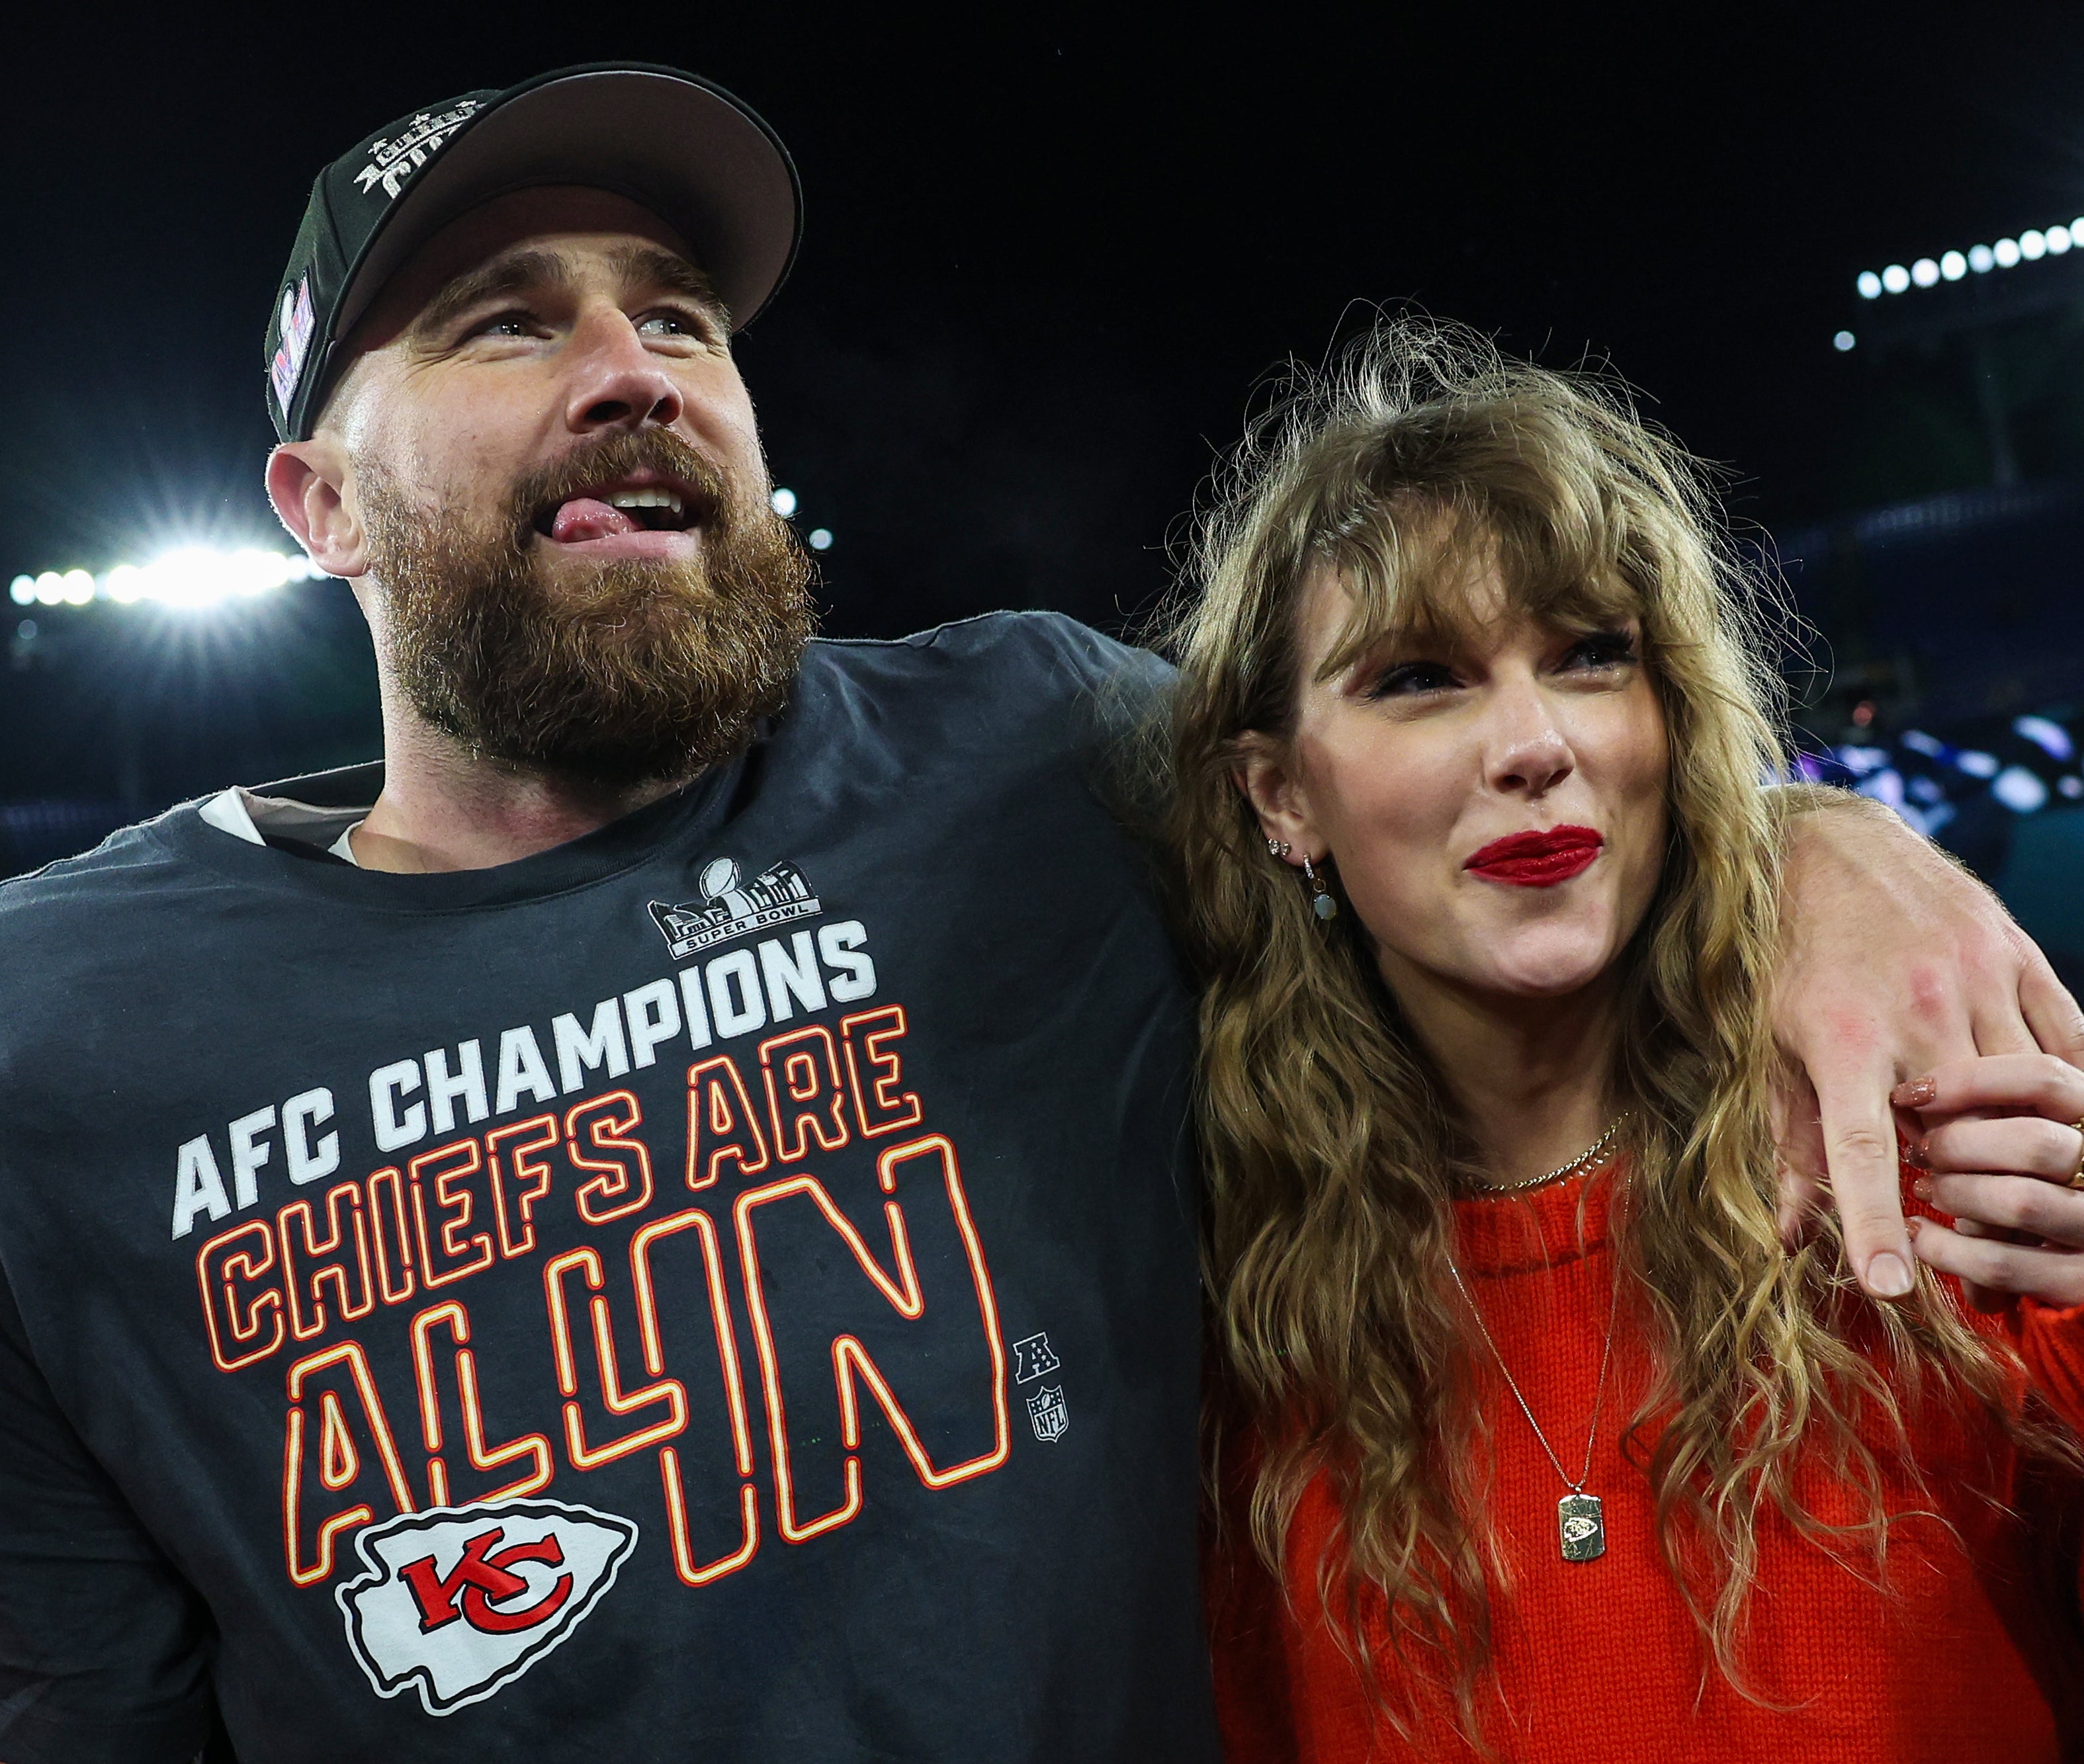 Man in AFC Champions shirt and woman in orange top smiling on football field